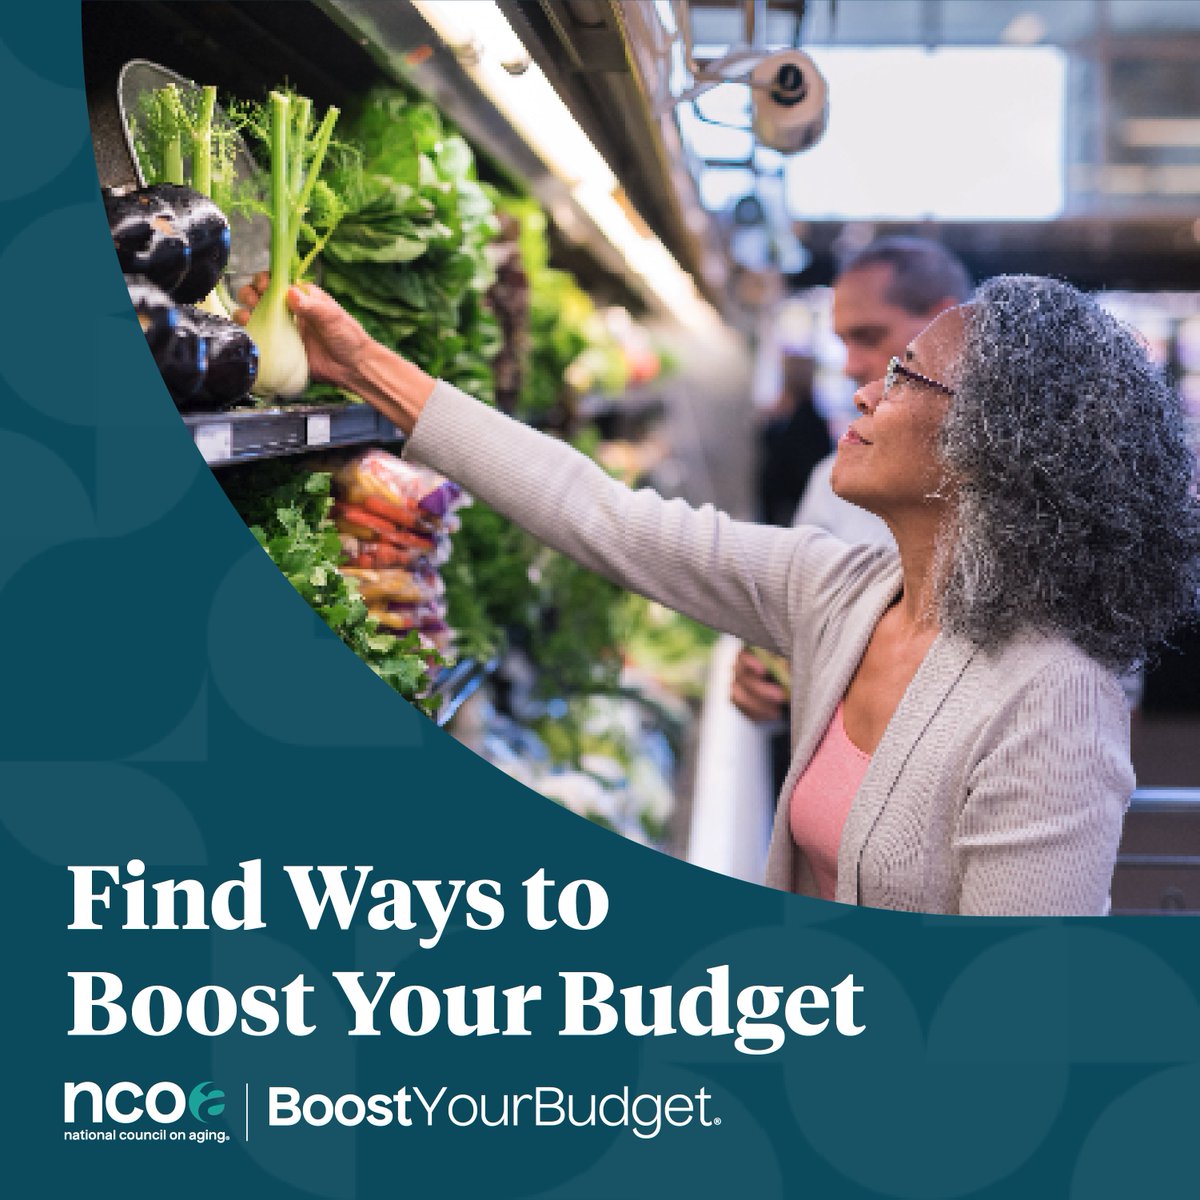 #Inflation has heightened the threats to older adults’ foundation for aging well: their budgets. Use BenefitsCheckUp® to find benefits that help you afford necessities like utilities. ncoa.org/Boost

#BoostYourBudgetWeek